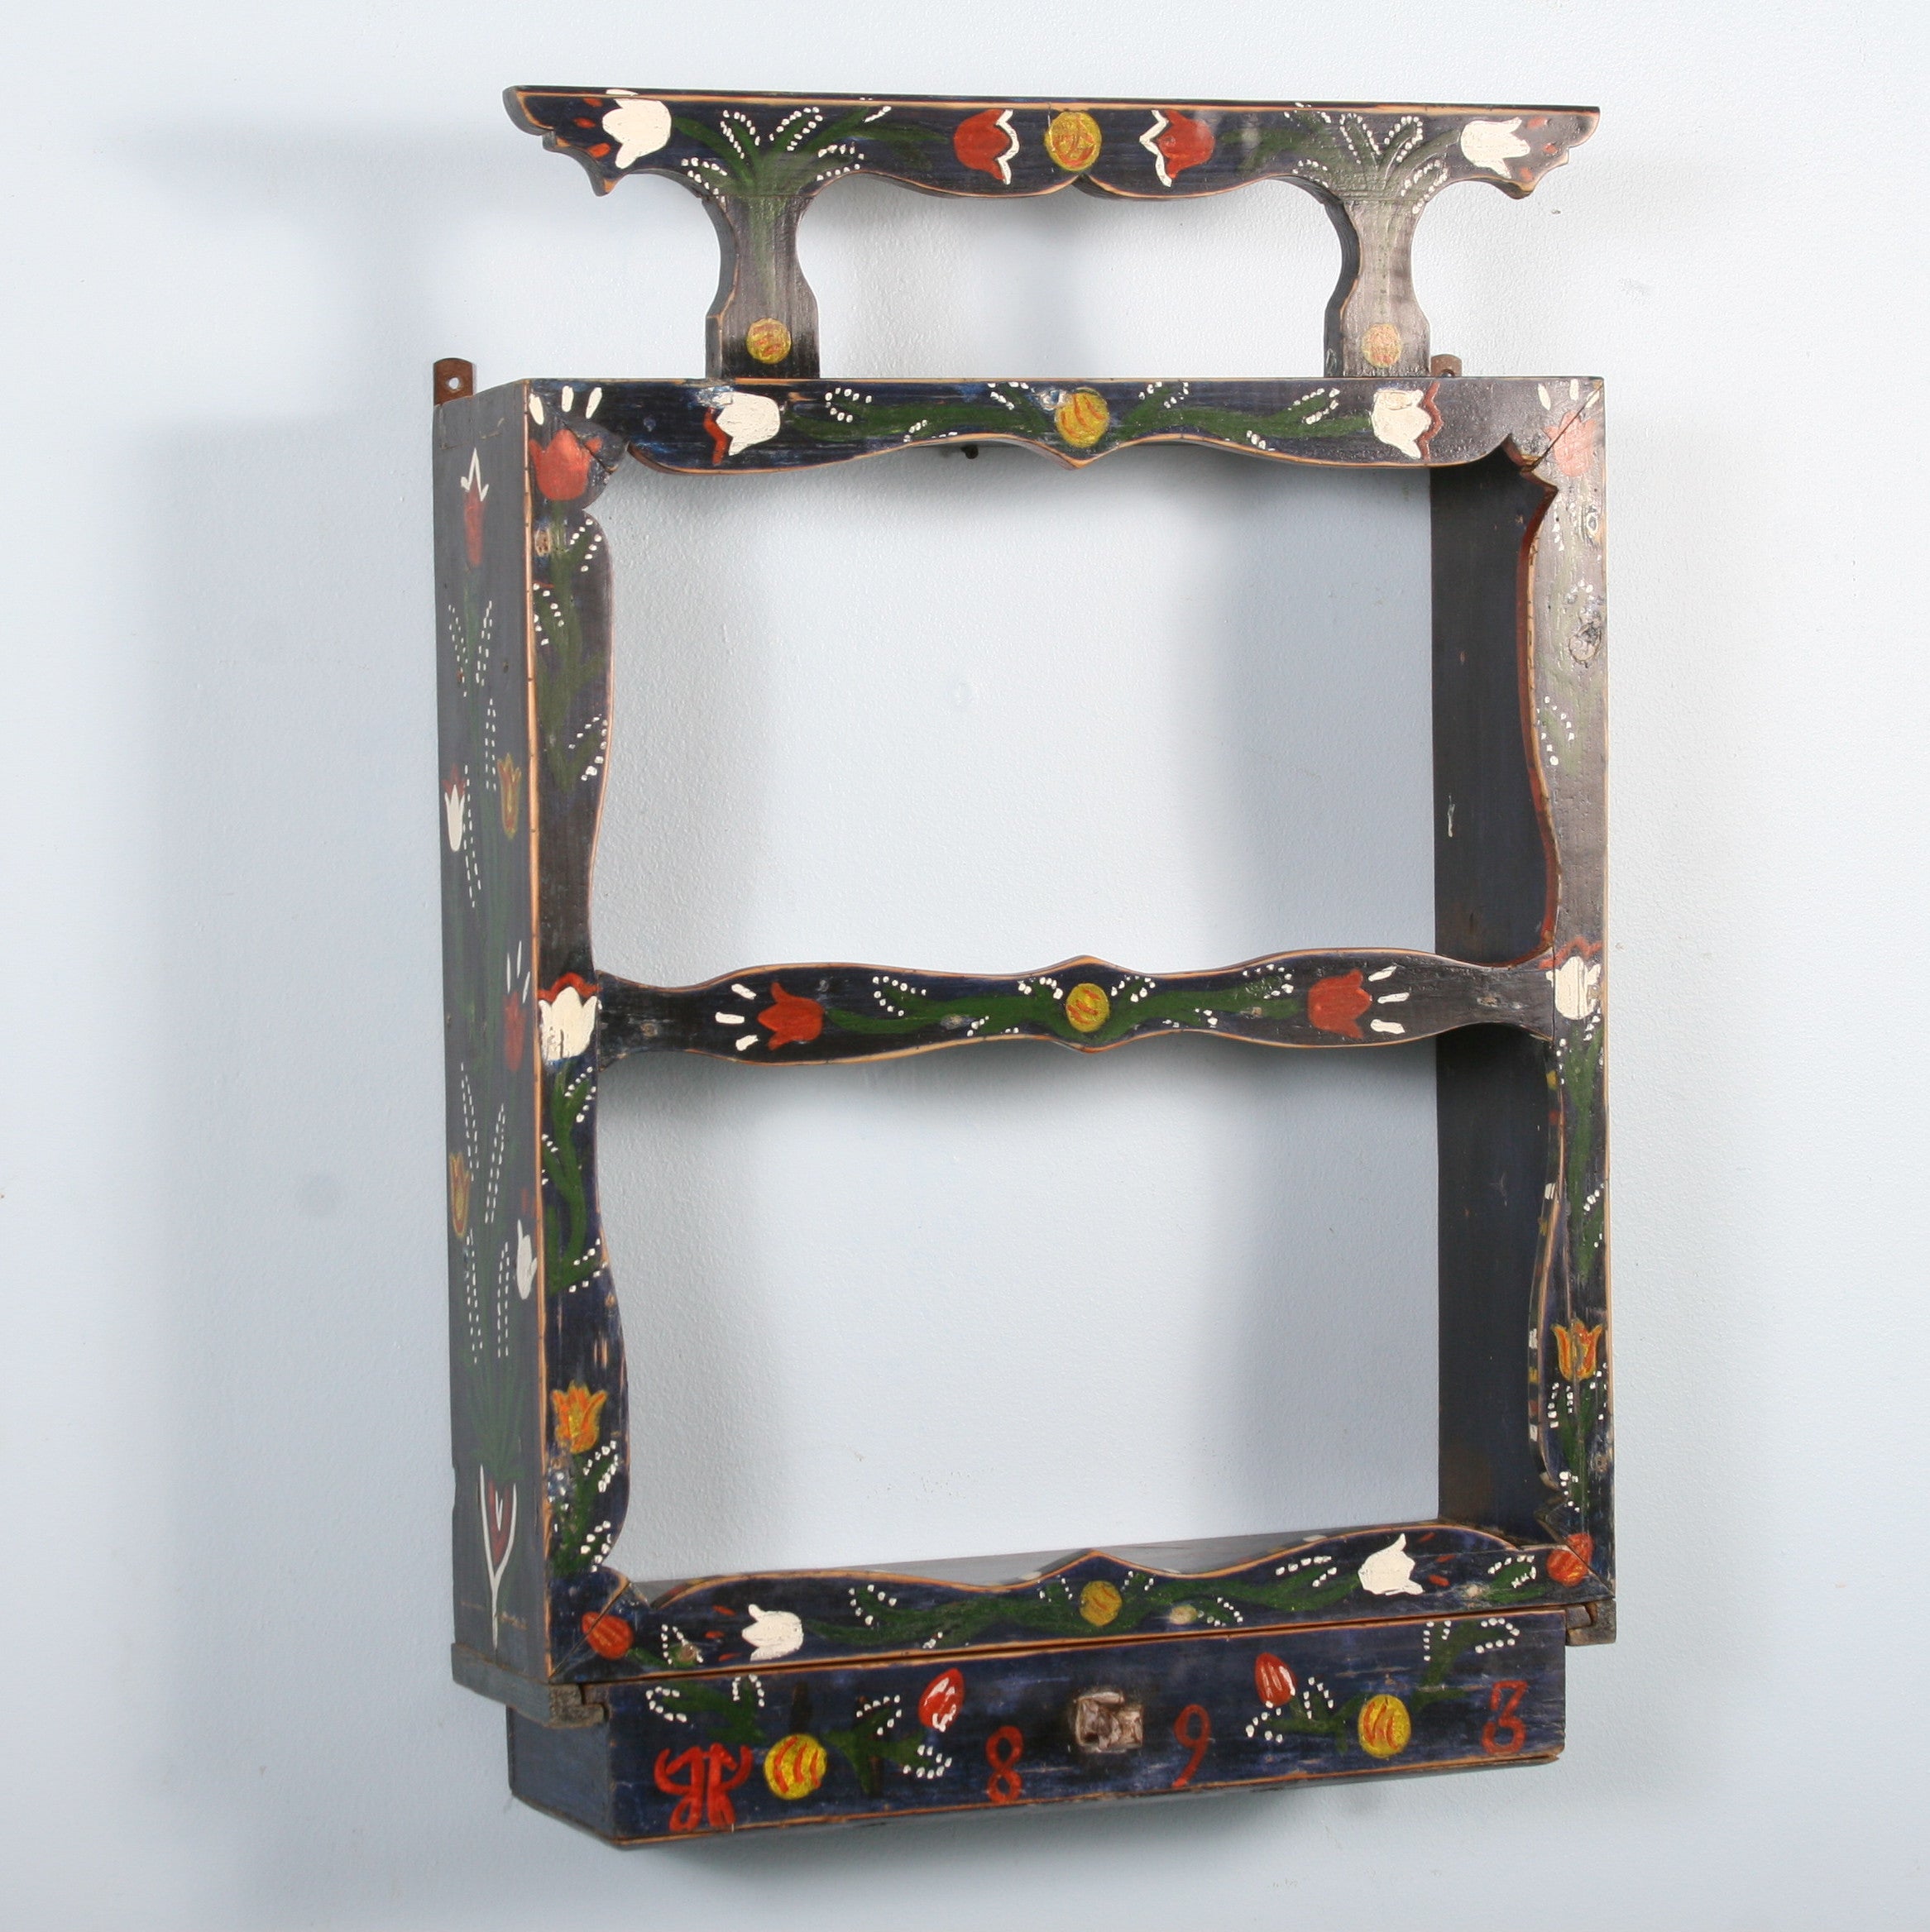 Antique Original Painted Hanging Shelf with Drawer, dated 1898